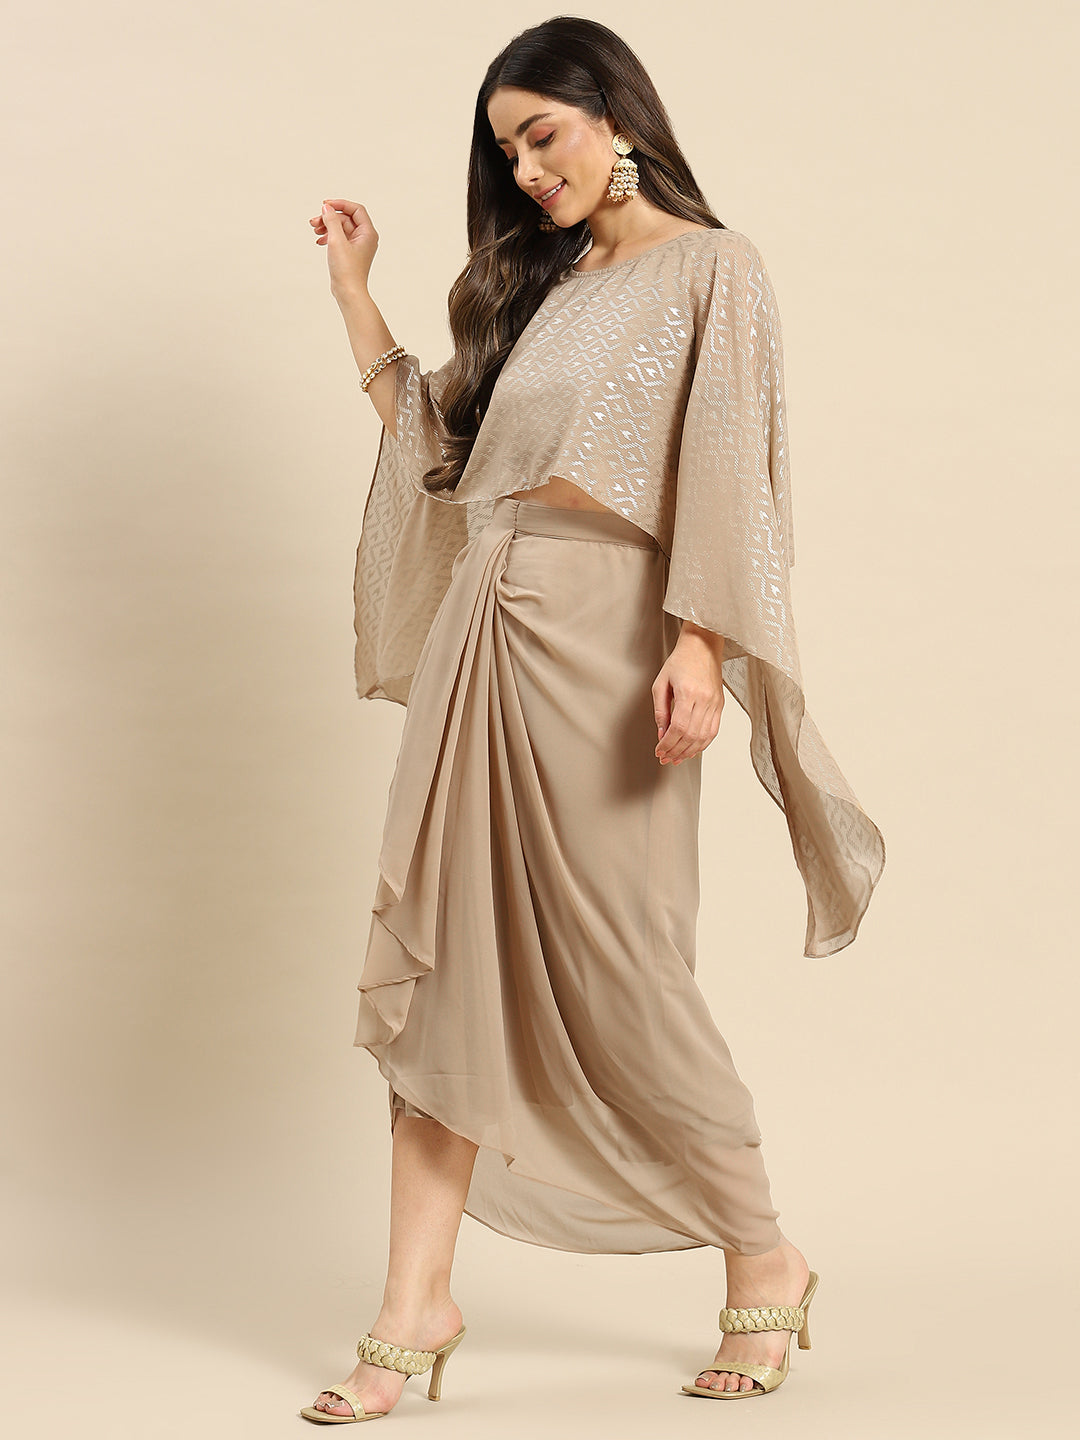 Cape top with draped skirt